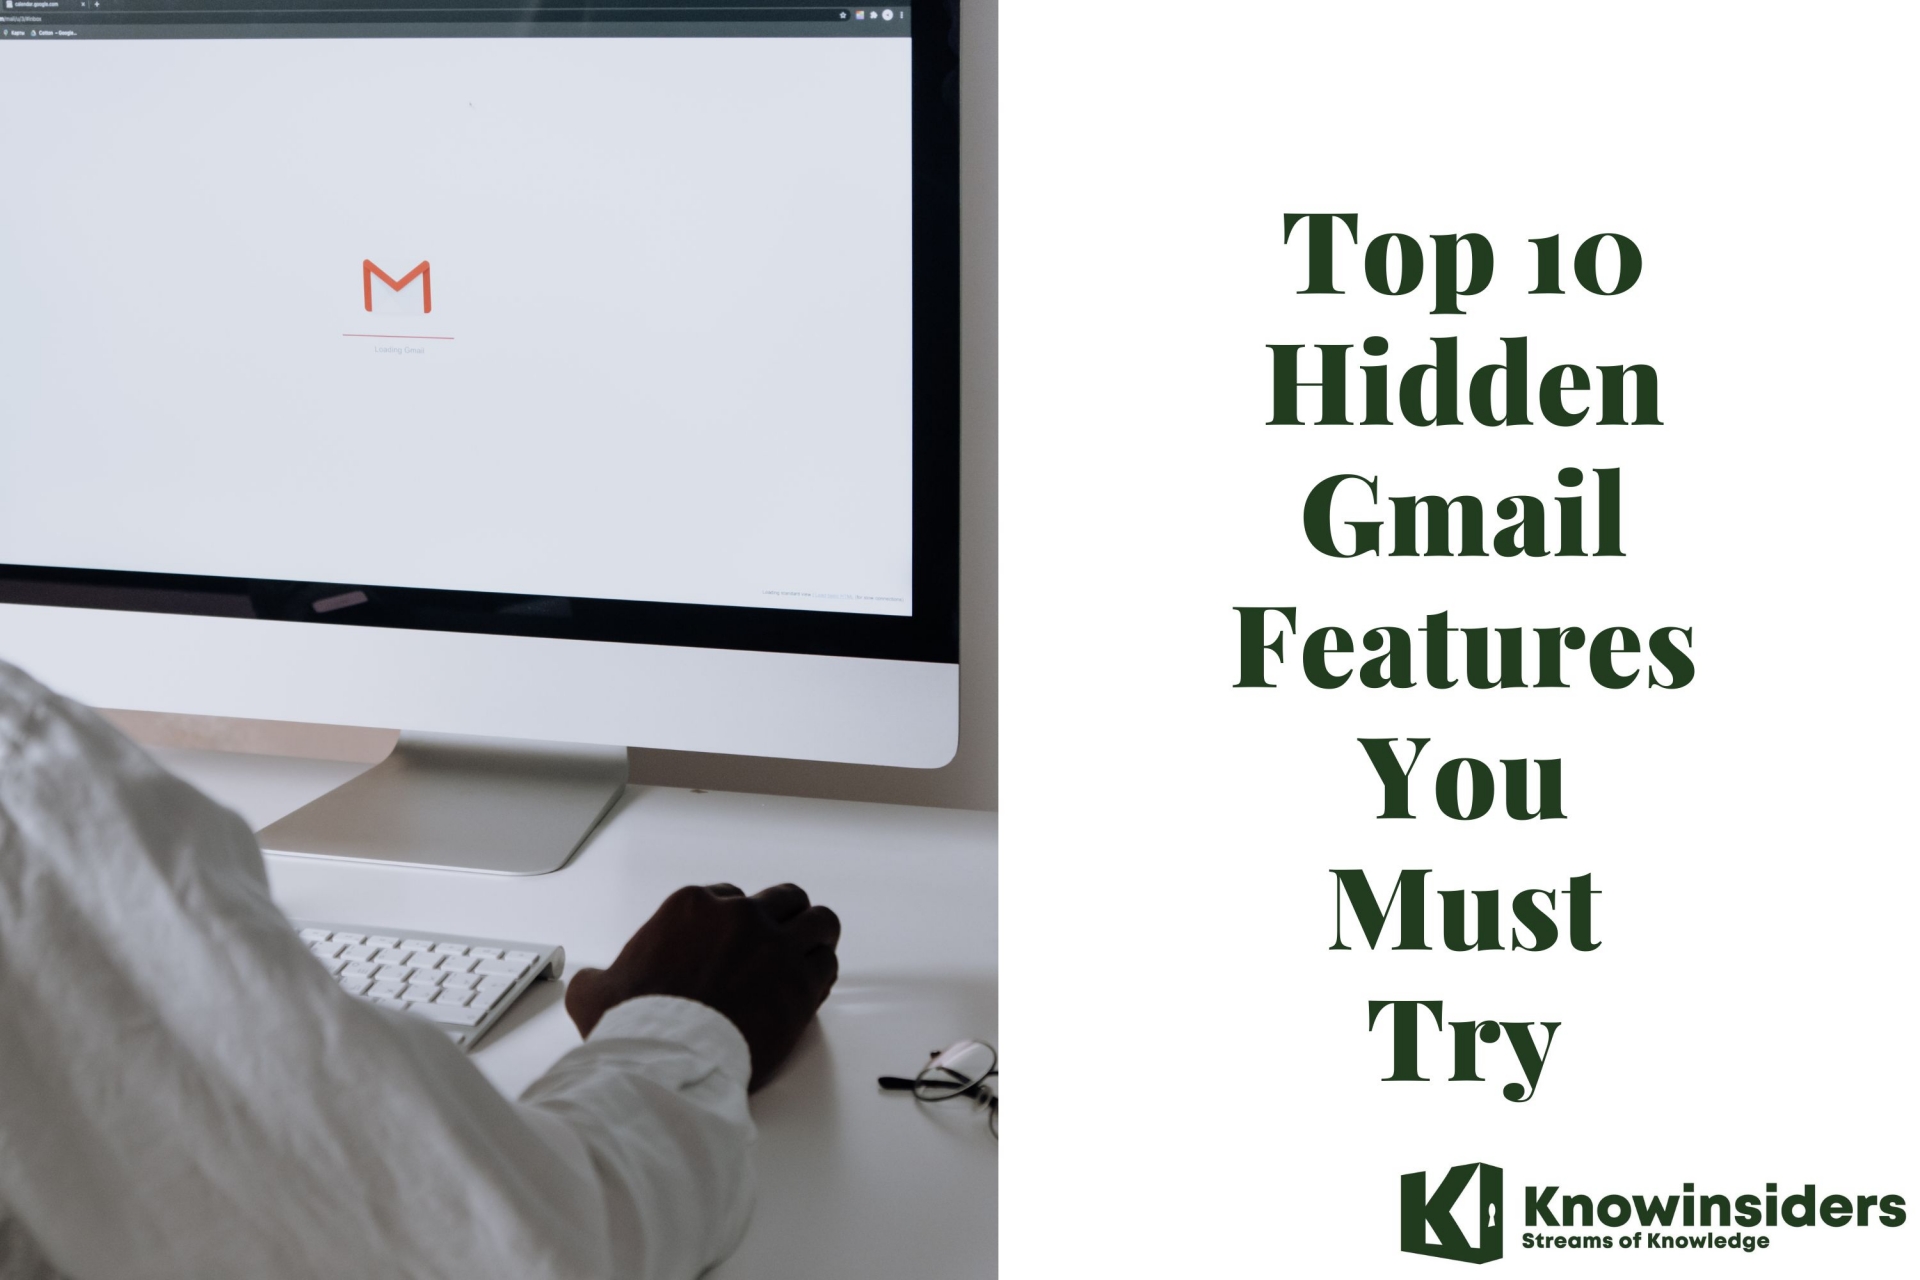 Top 10 Hidden Gmail Features You Must Try